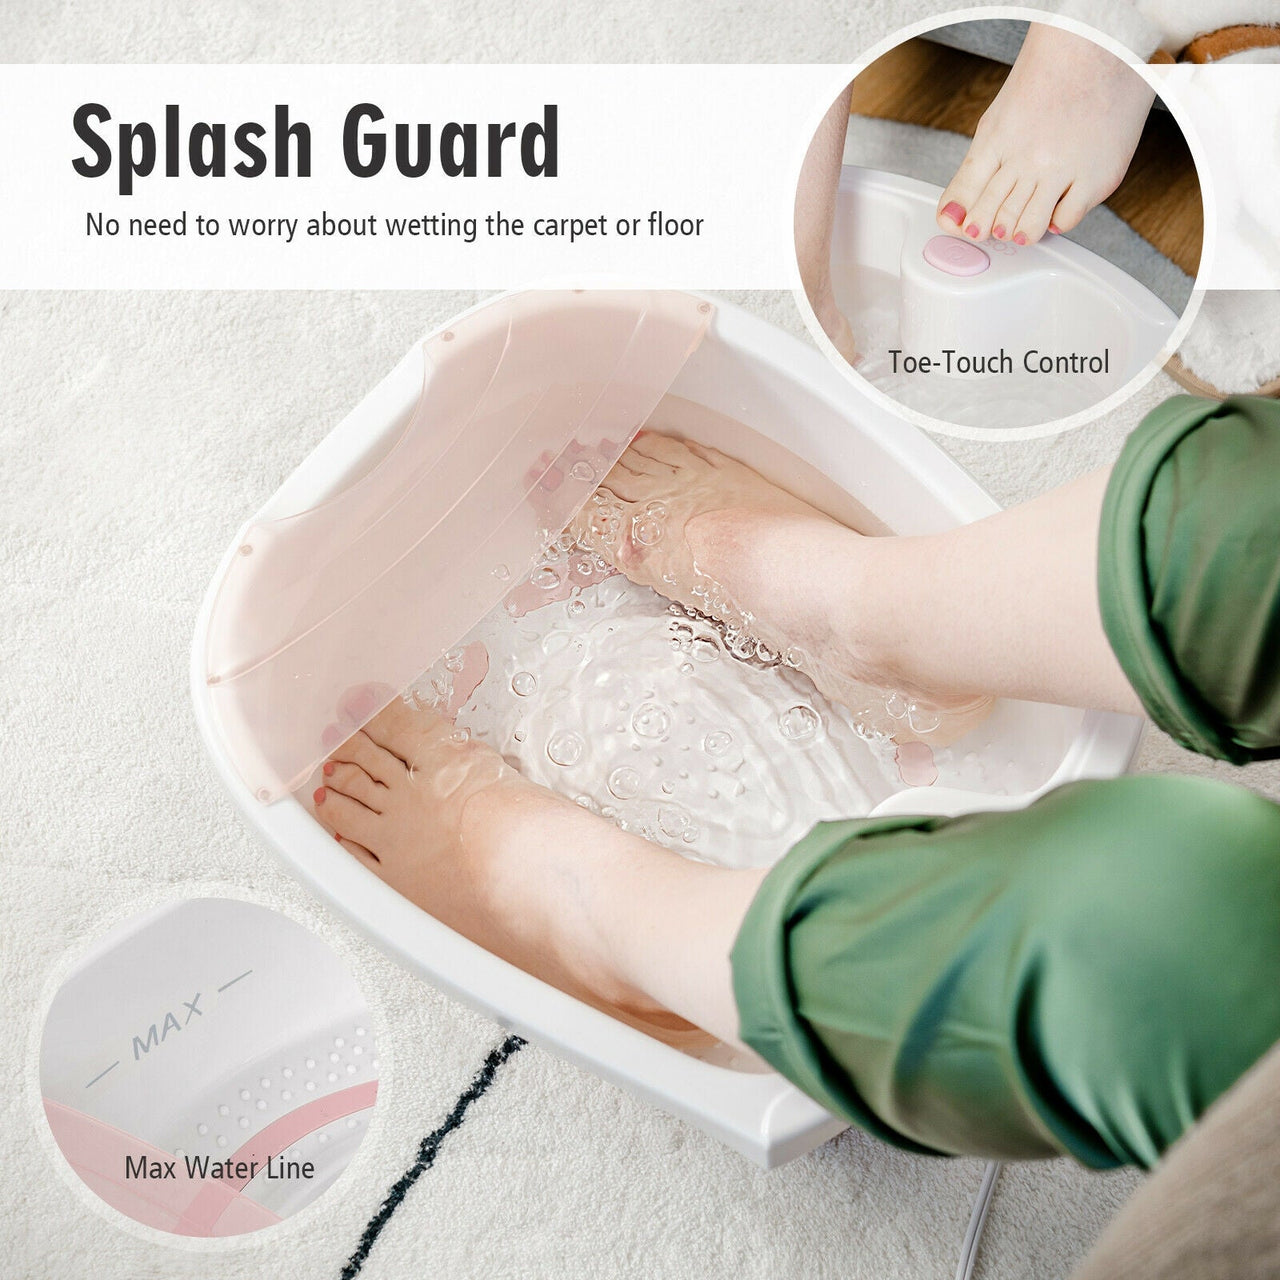 Foot Spa Bath with Bubble Massage